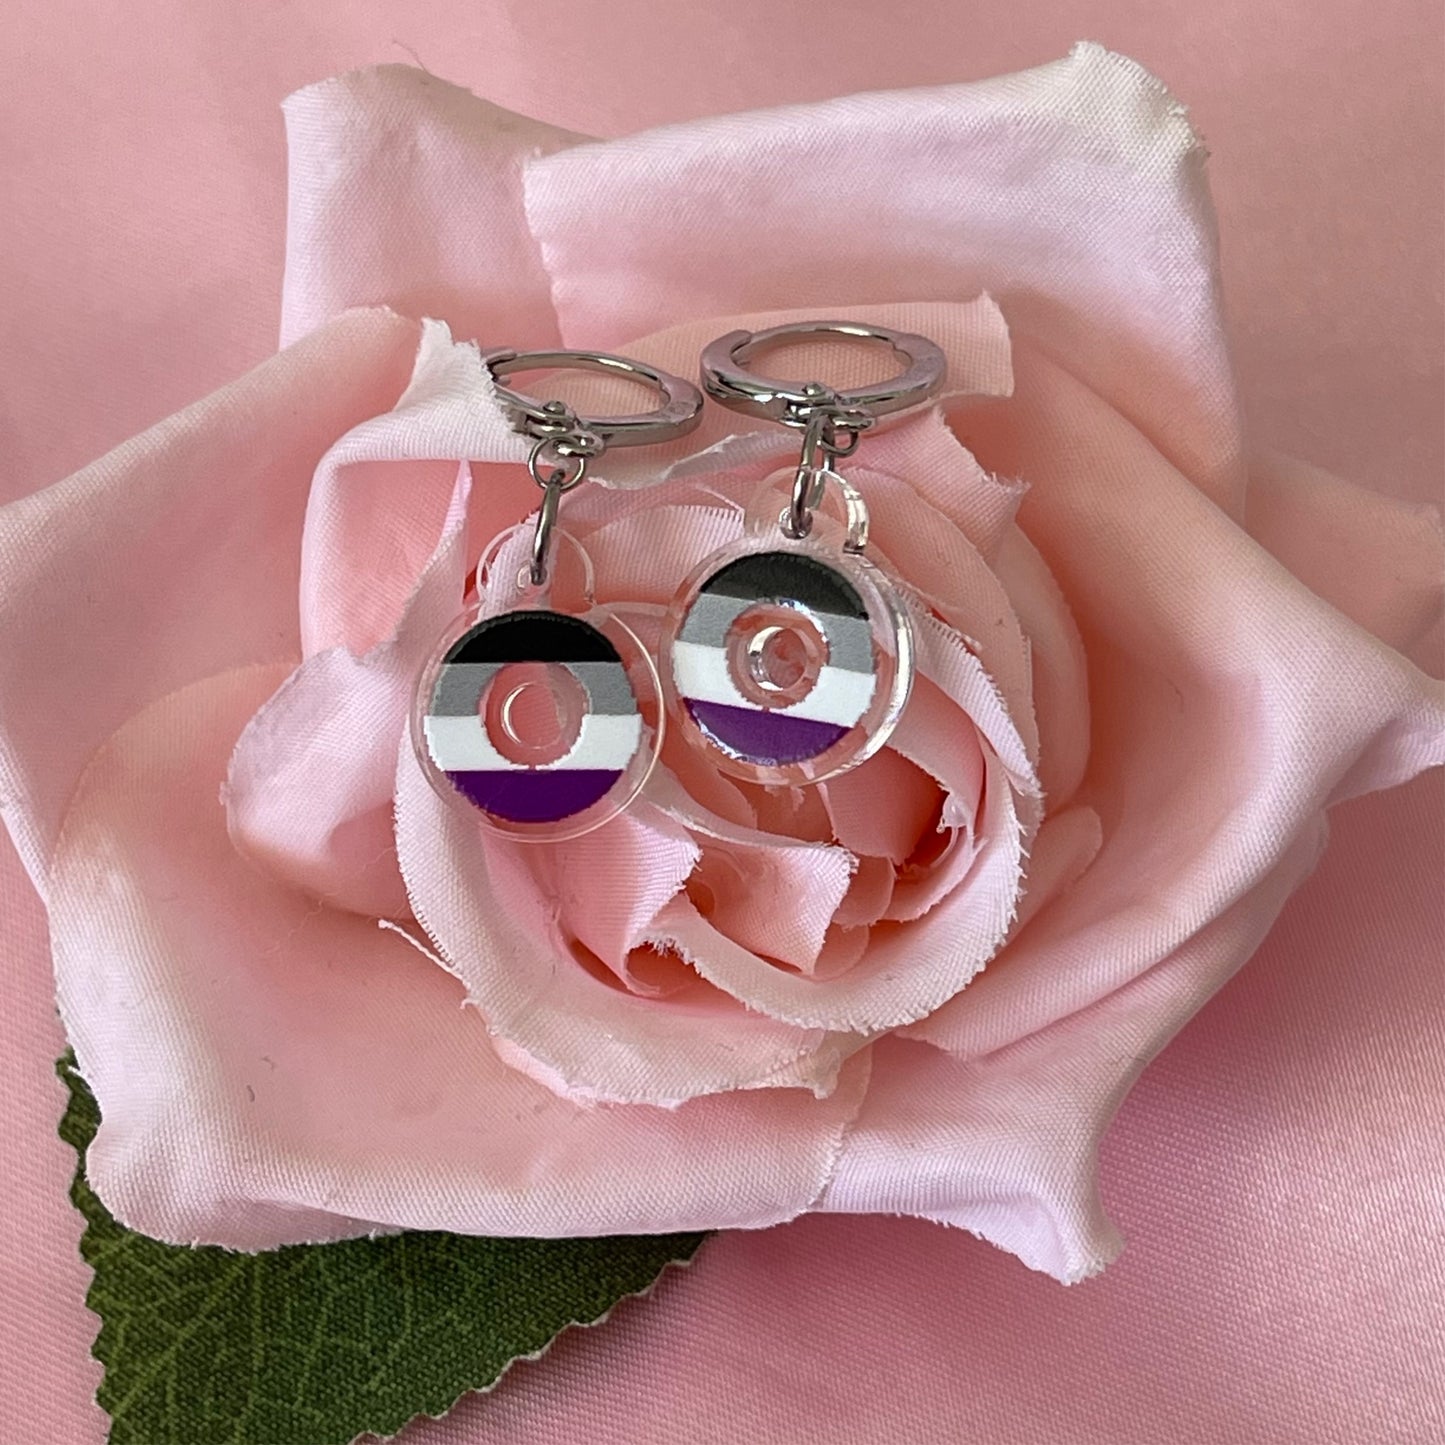 Asexual Pride Flag Inspired Earrings - Lxyclr Authentic